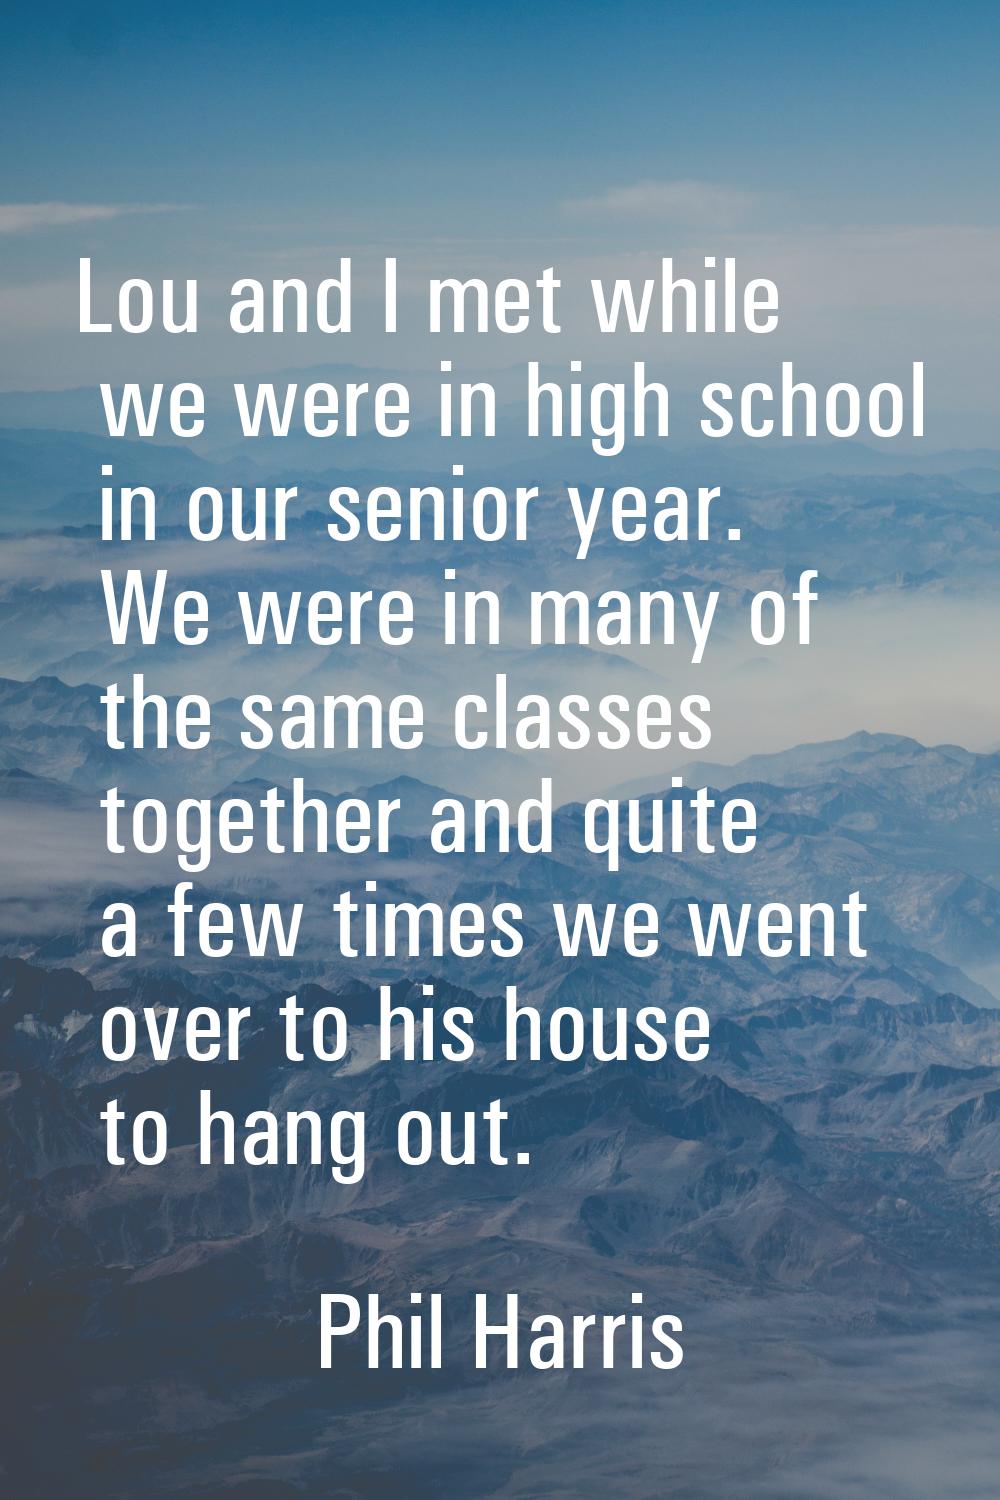 Lou and I met while we were in high school in our senior year. We were in many of the same classes 